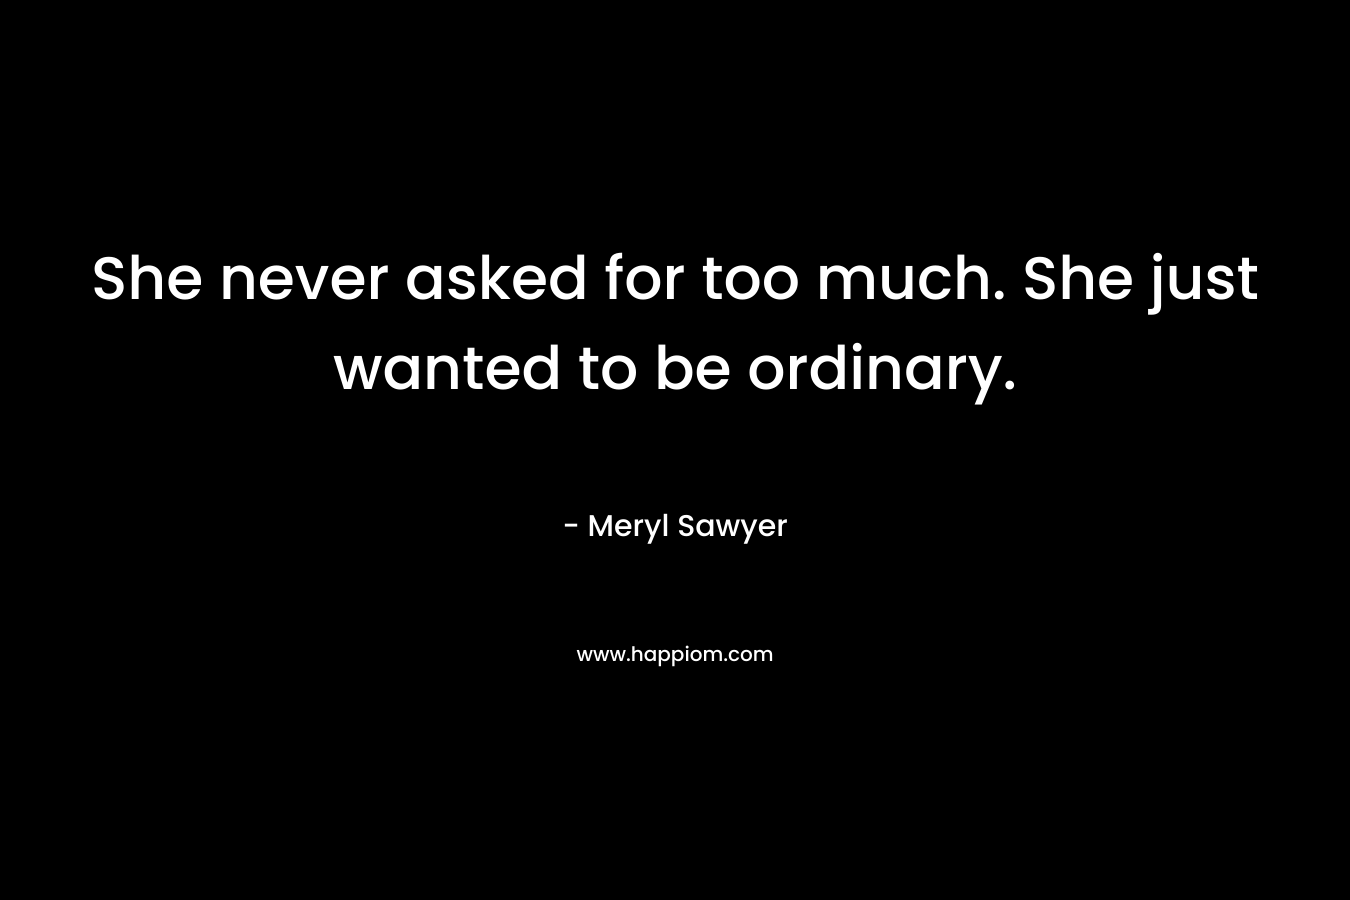 She never asked for too much. She just wanted to be ordinary.